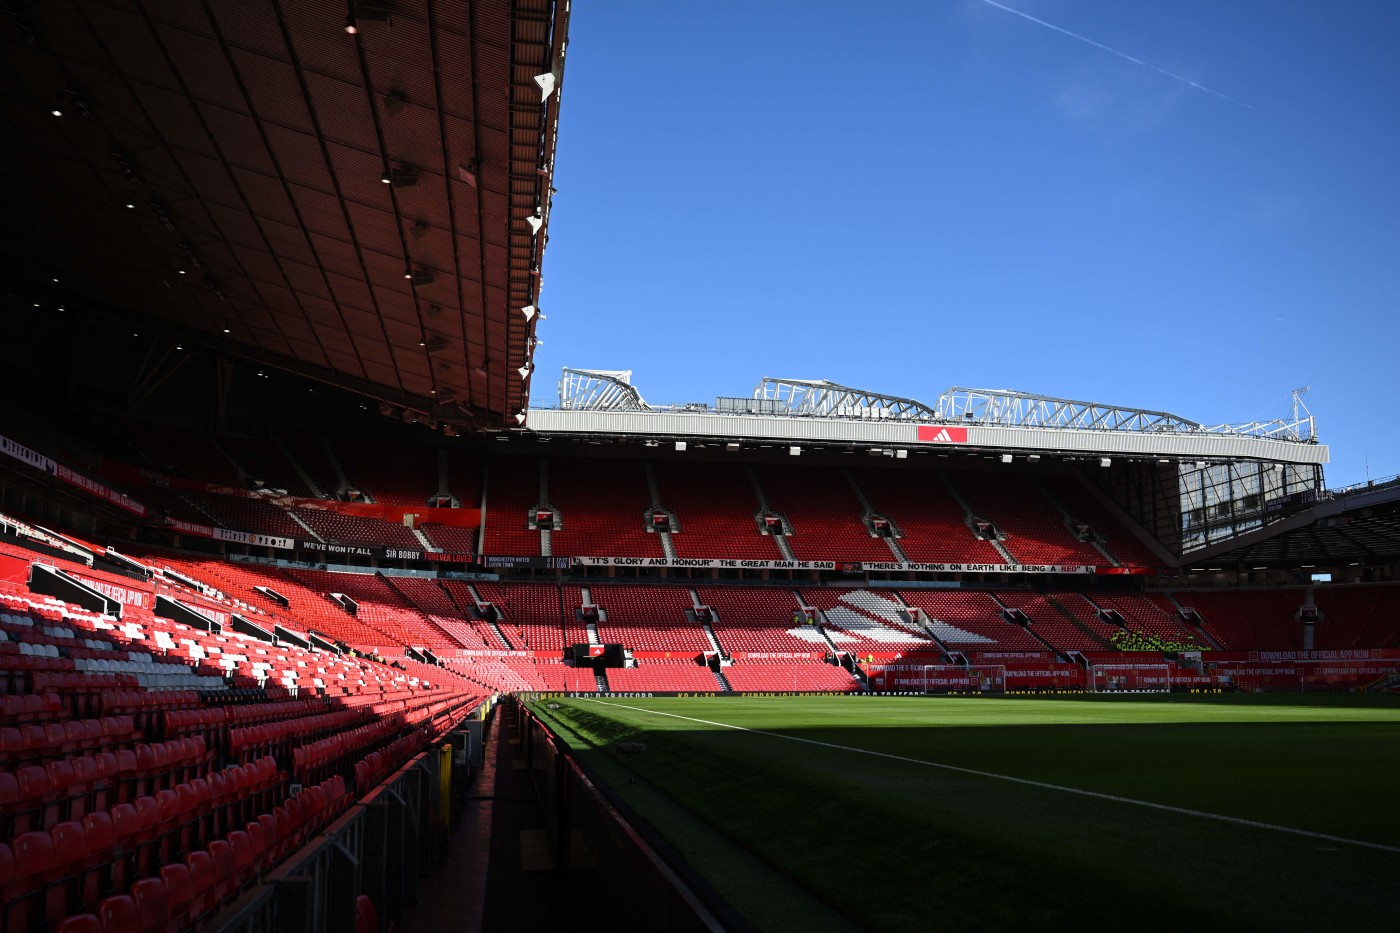 Our final game of the season will take place at Old Trafford